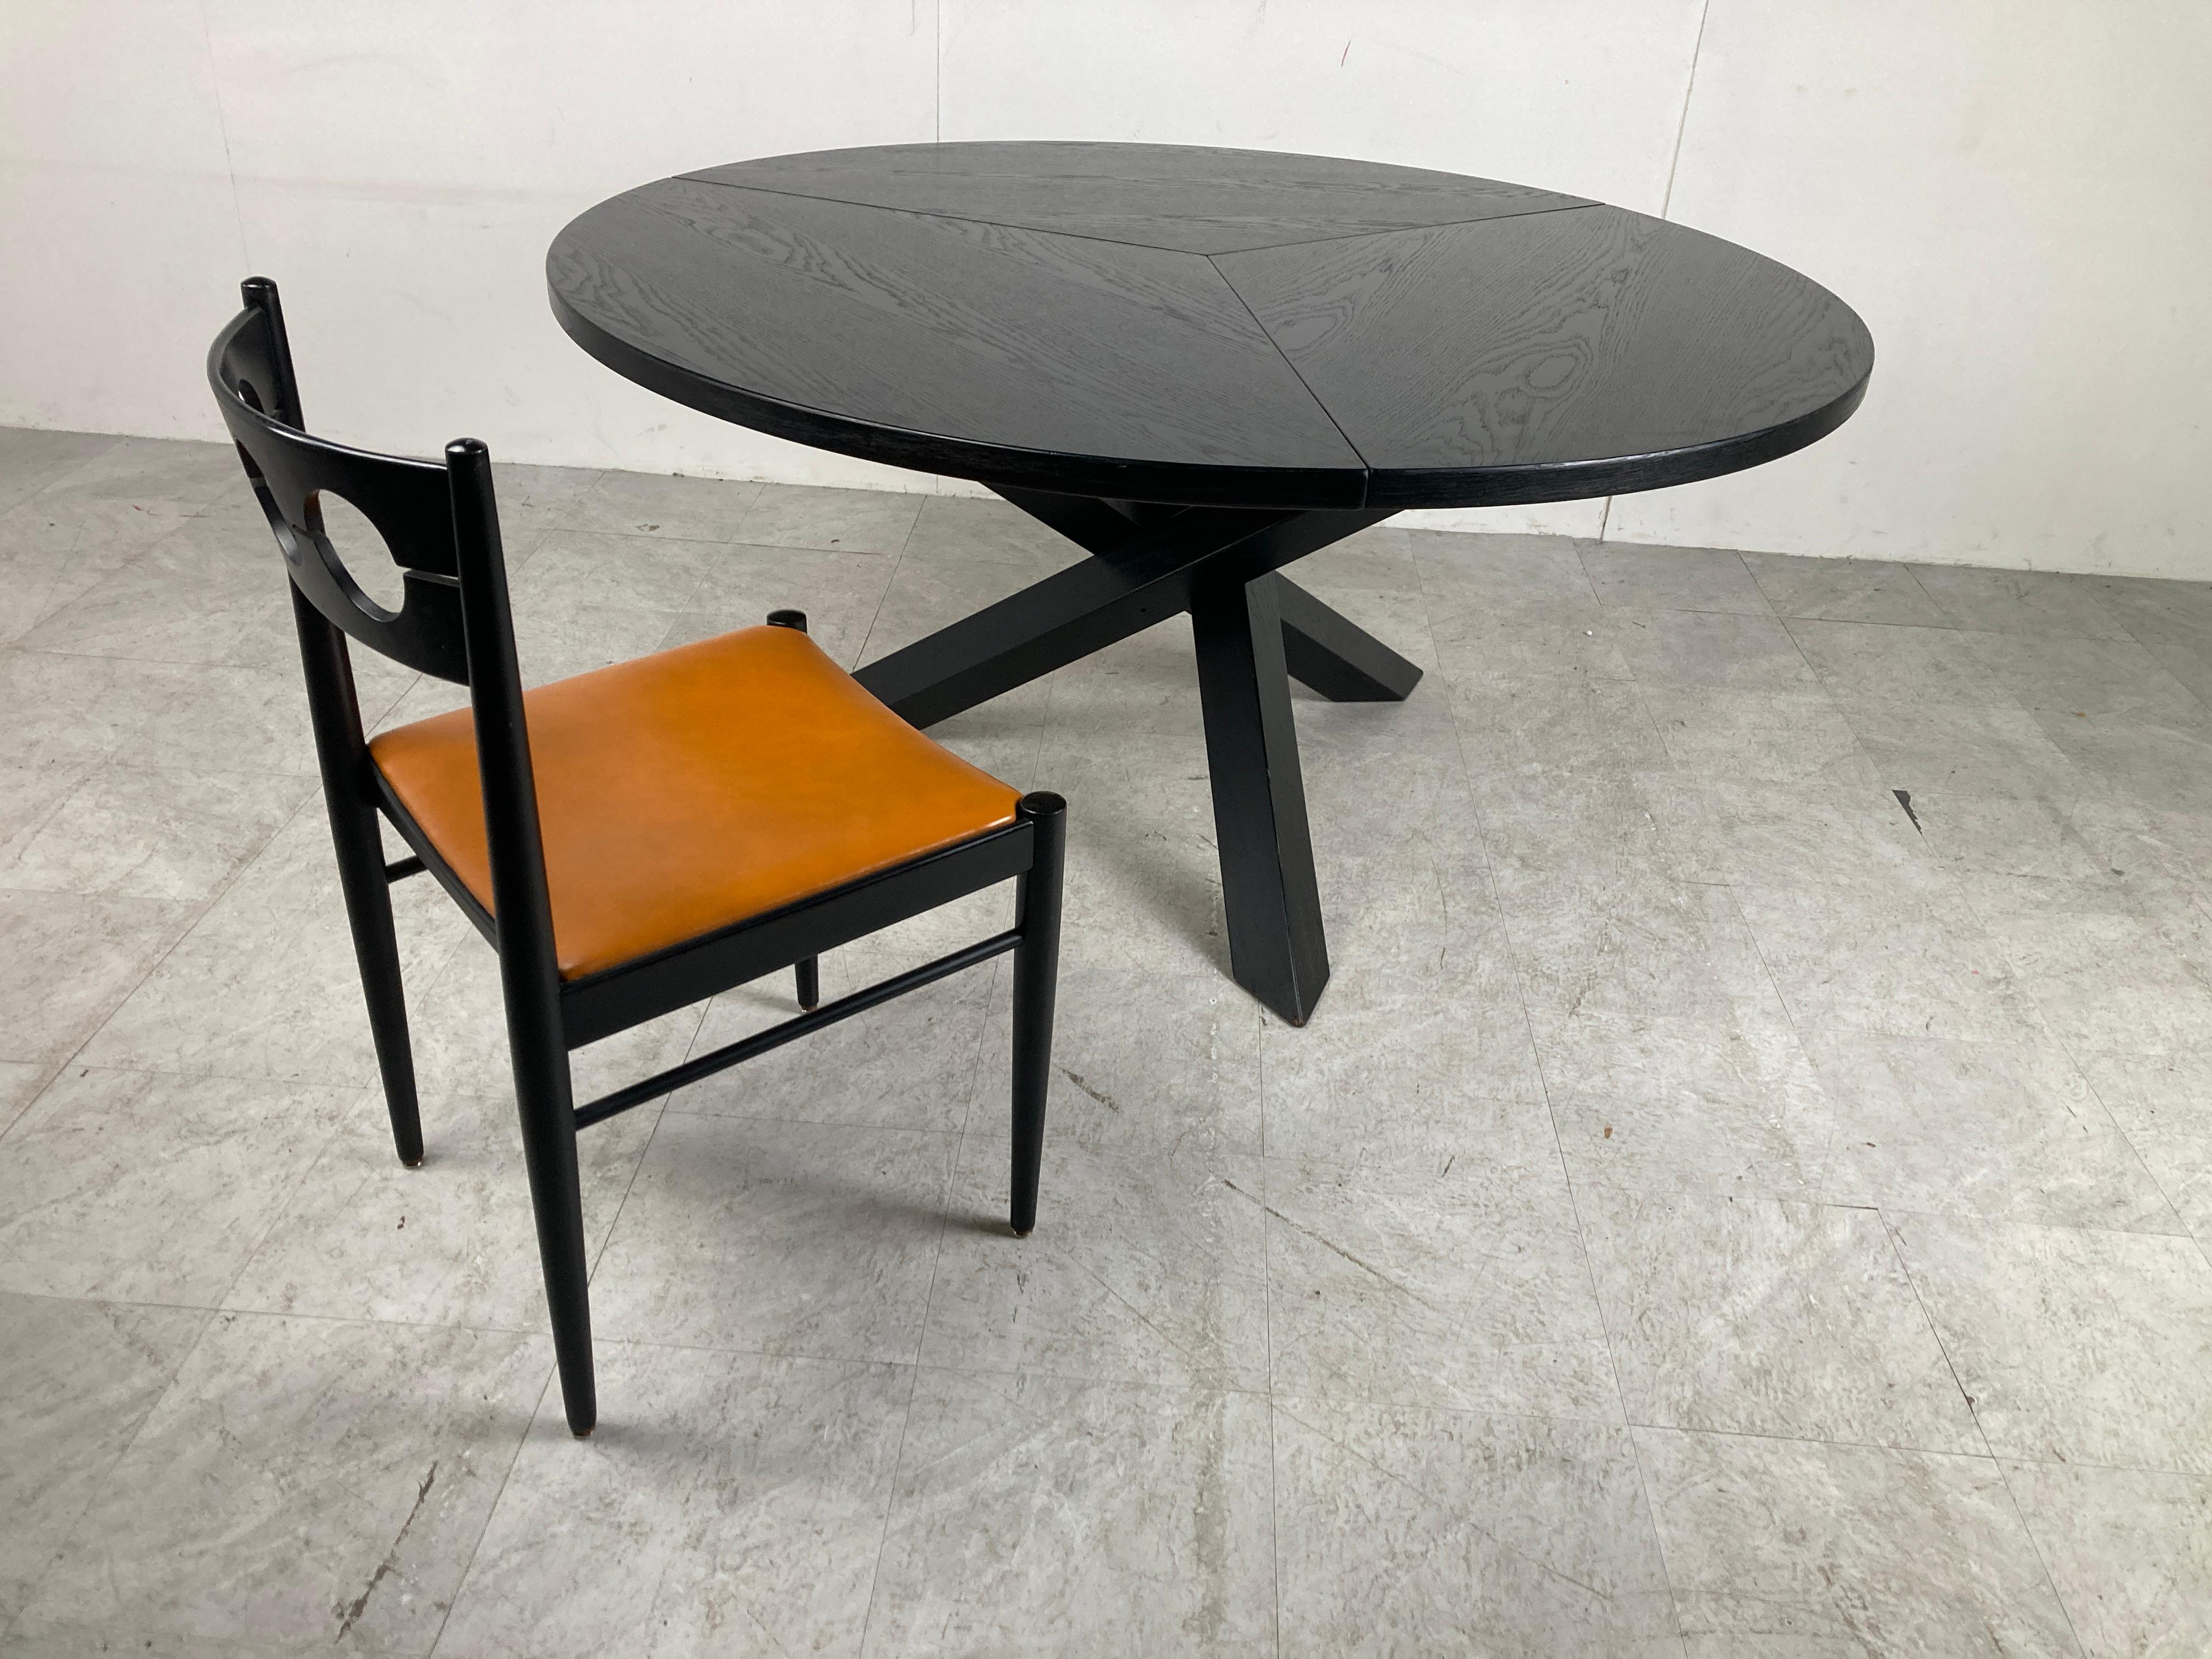 Vintage round dining table with a black ash wood table top divided in three parts and a solid wooden cross legged base.

Beautiful timeless design.

Very good condition.

Designed by Martin Visser for 't Spectrum

1970s -